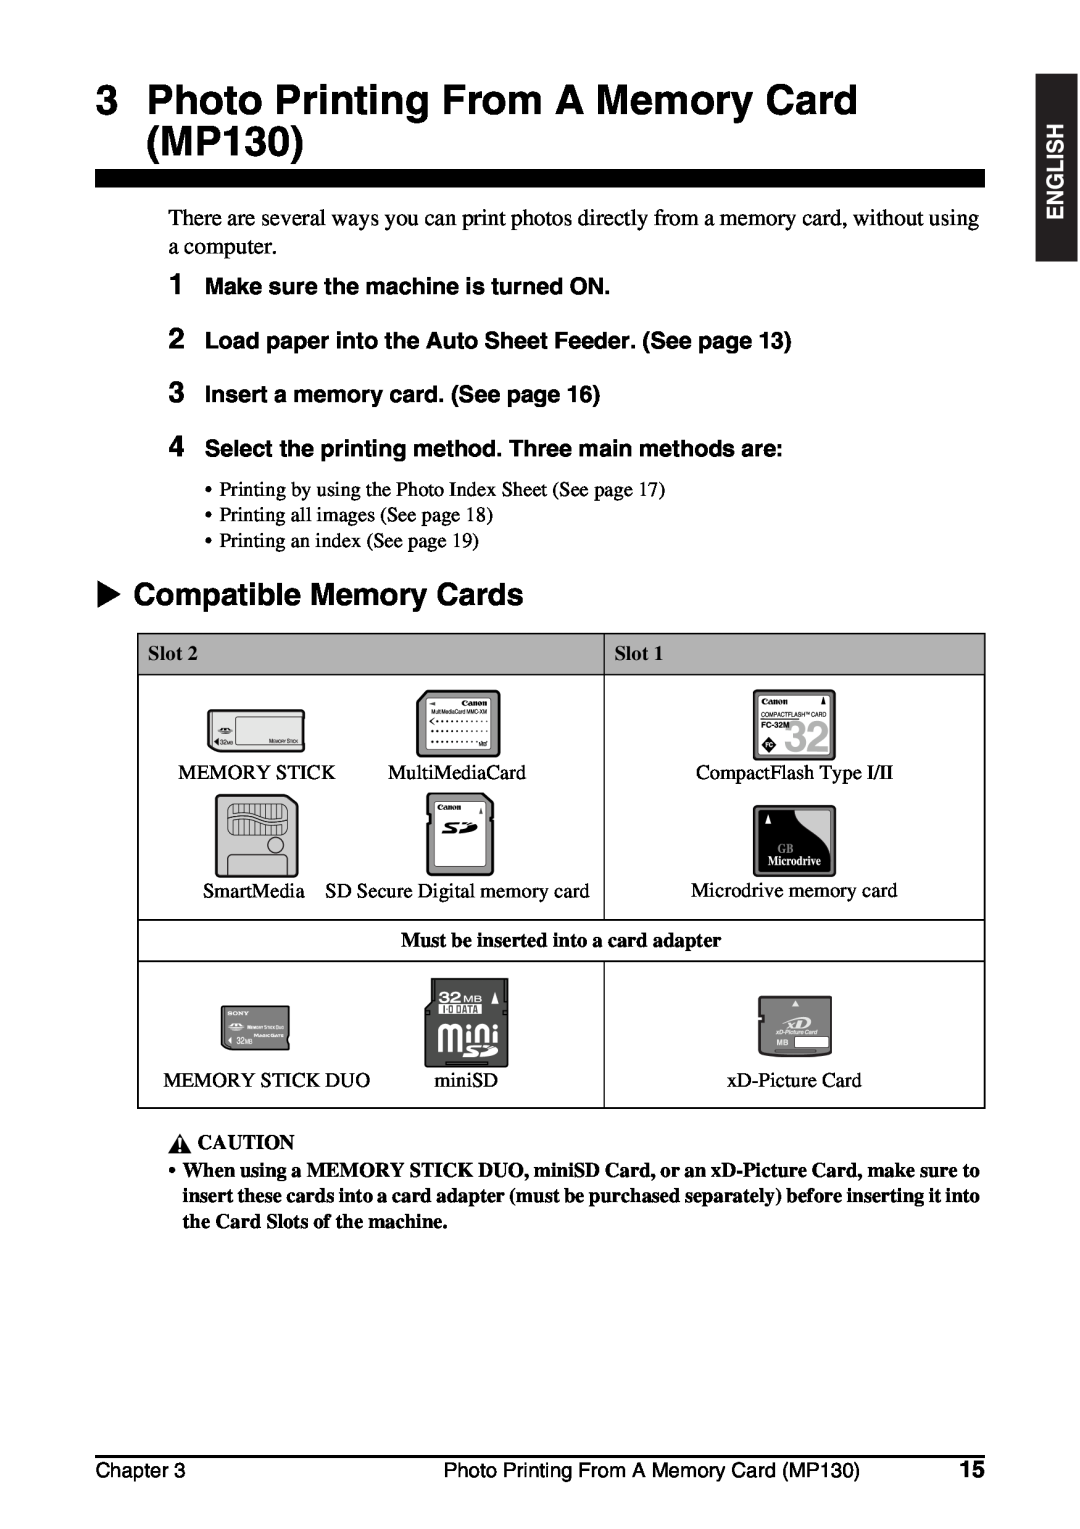 Canon Photo Printing From A Memory Card MP130, X Compatible Memory Cards, Slot, Must be inserted into a card adapter 